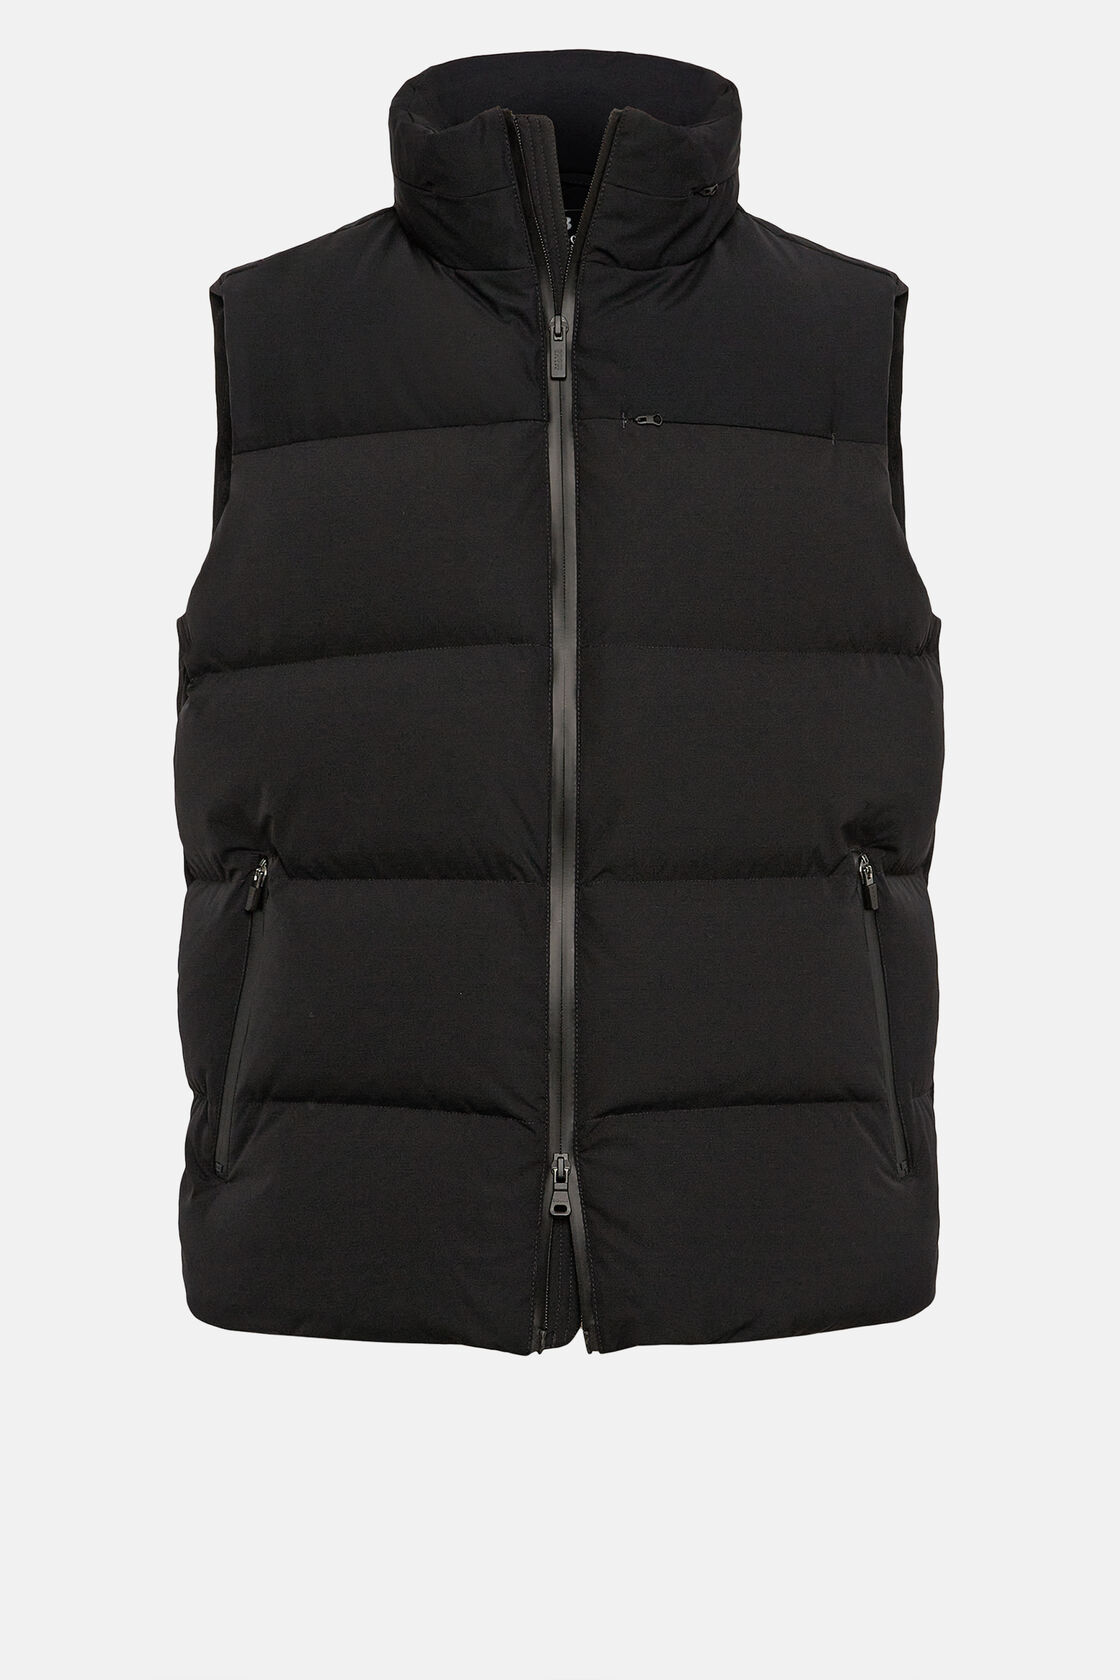 B Tech Gilet in Stretch Nylon With Goose Down, Black, hi-res